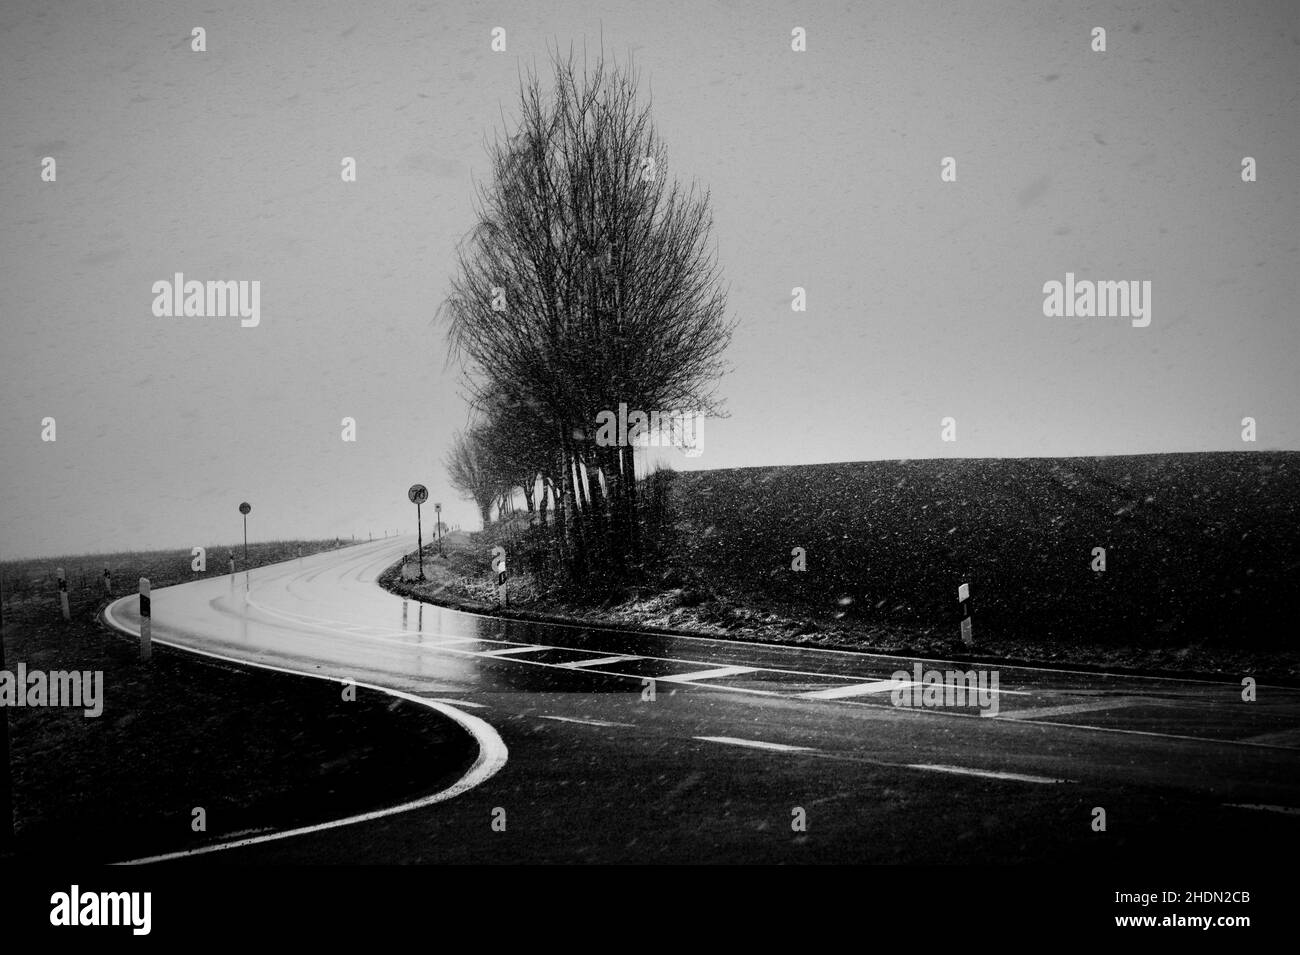 weather, street, road, snowing, weathers, roads, streets Stock Photo